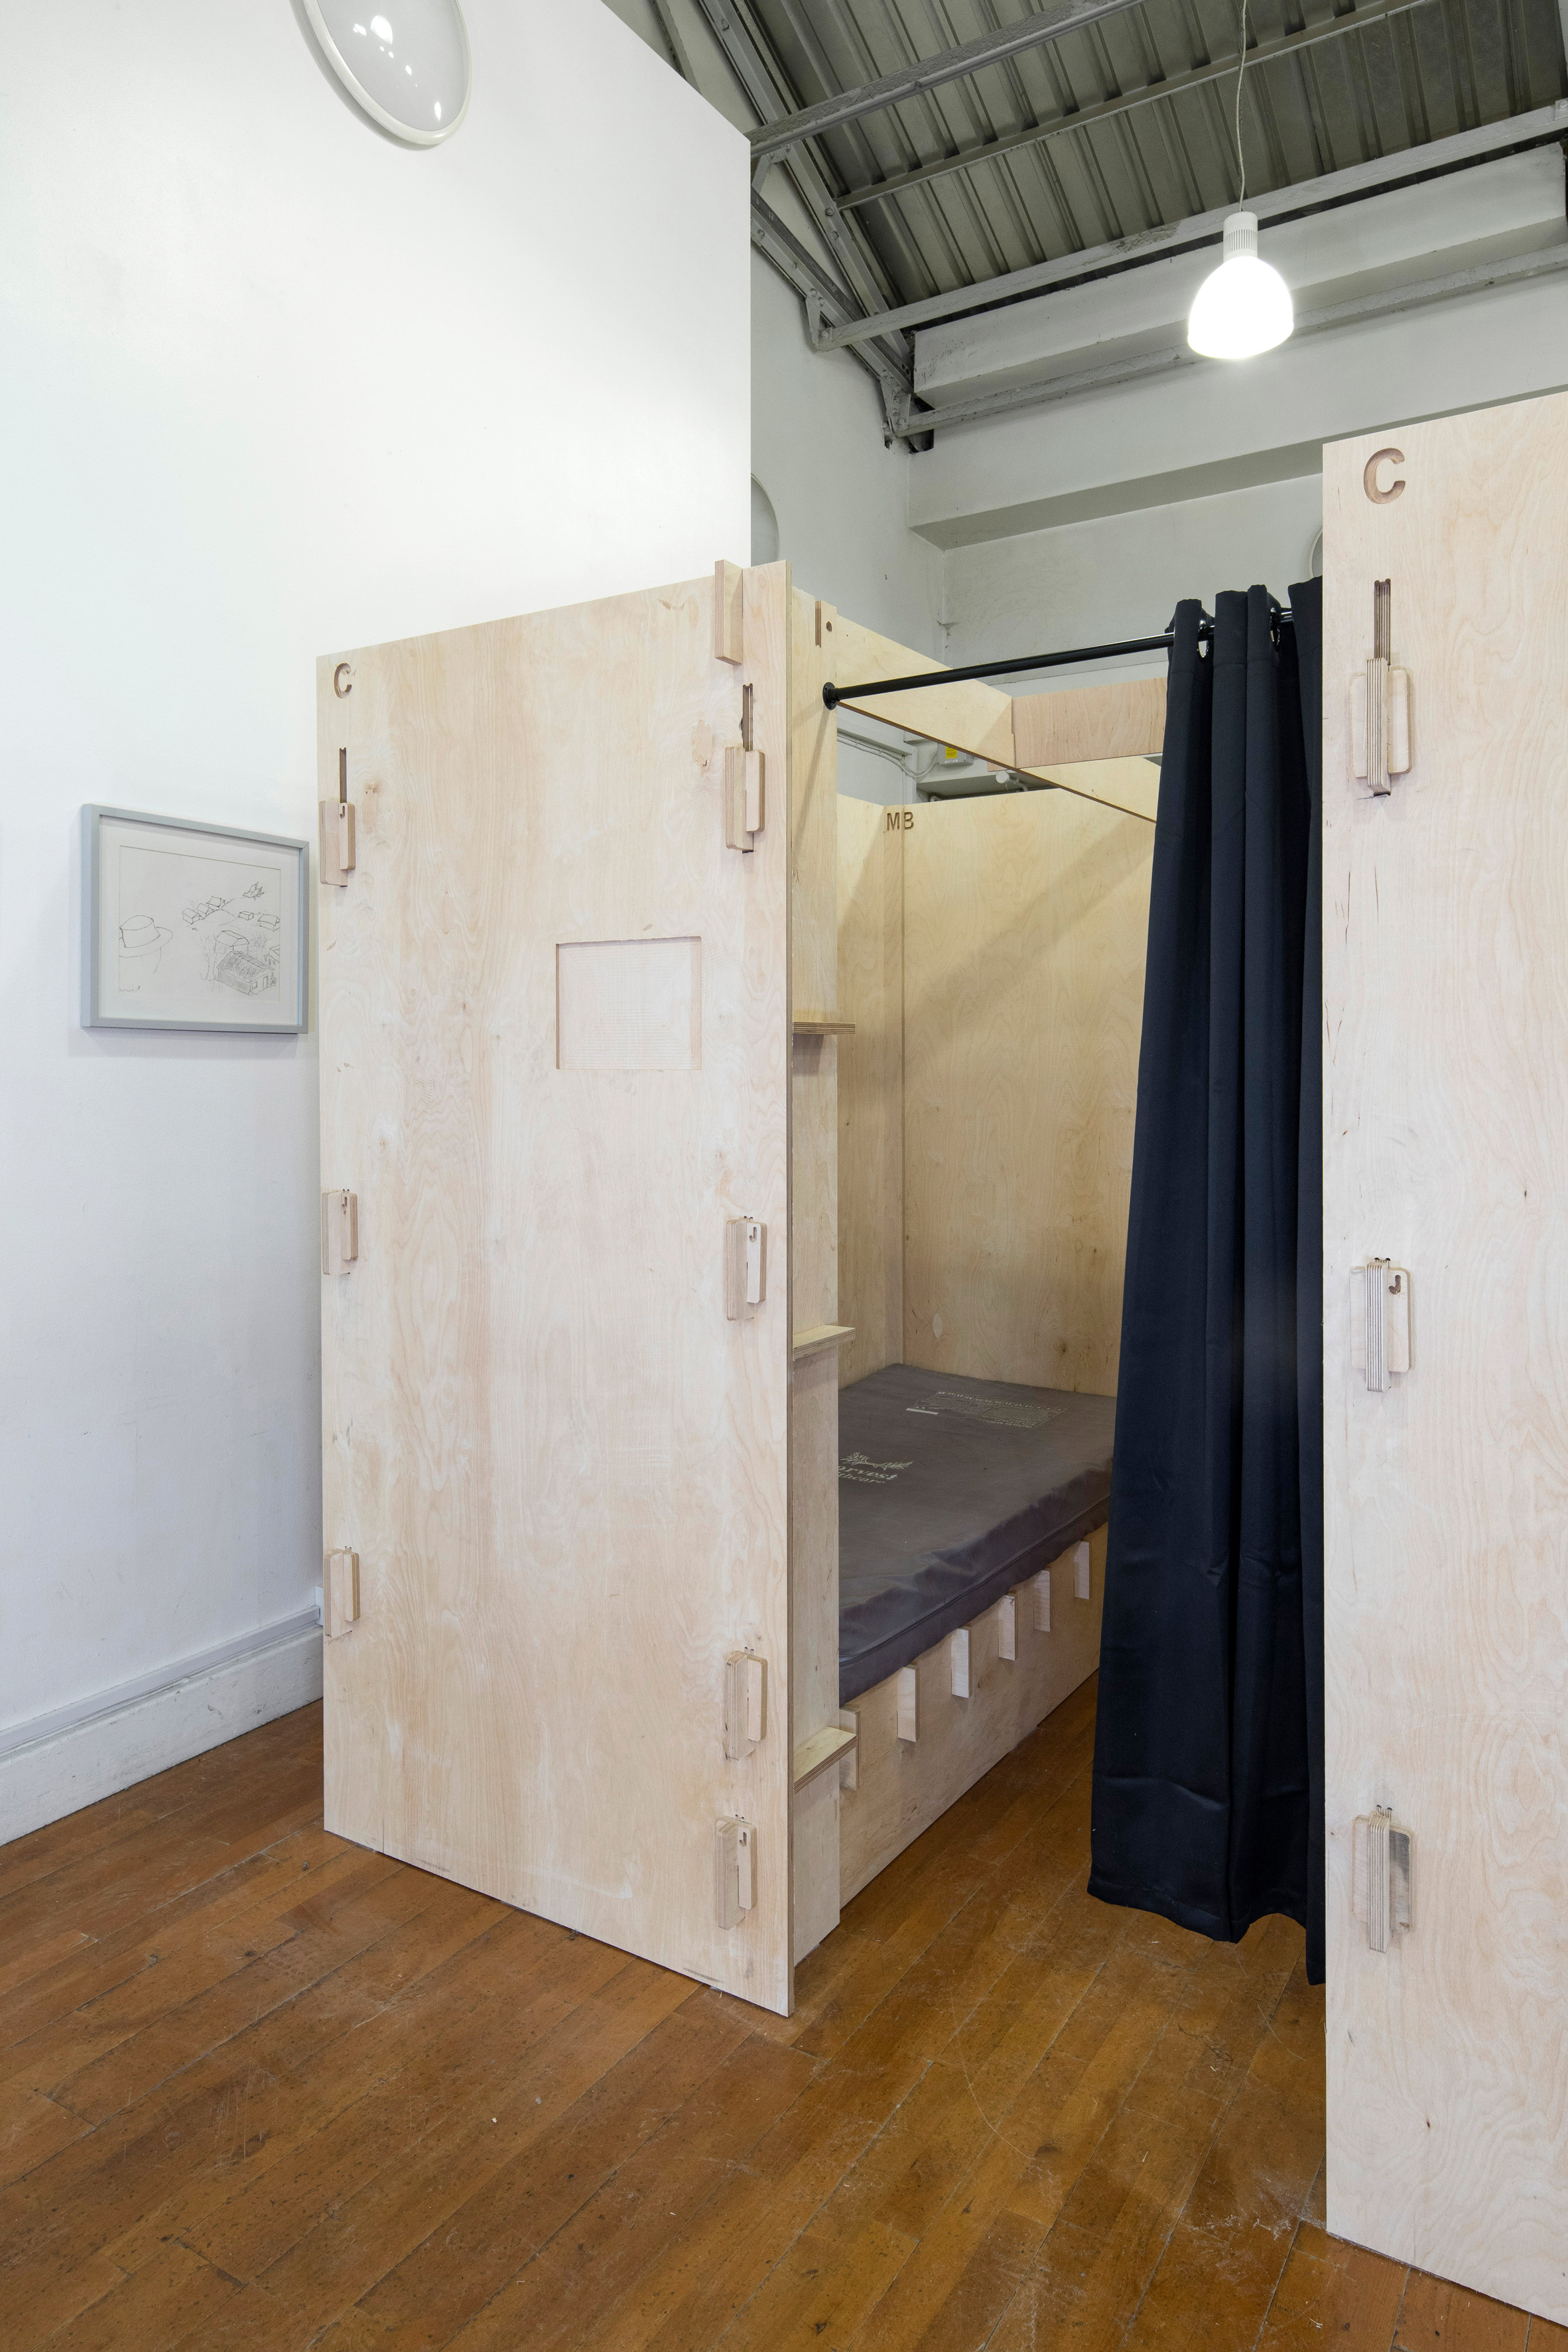 Commonweal Pods to provide beds for homeless people, London, by Reed Watts